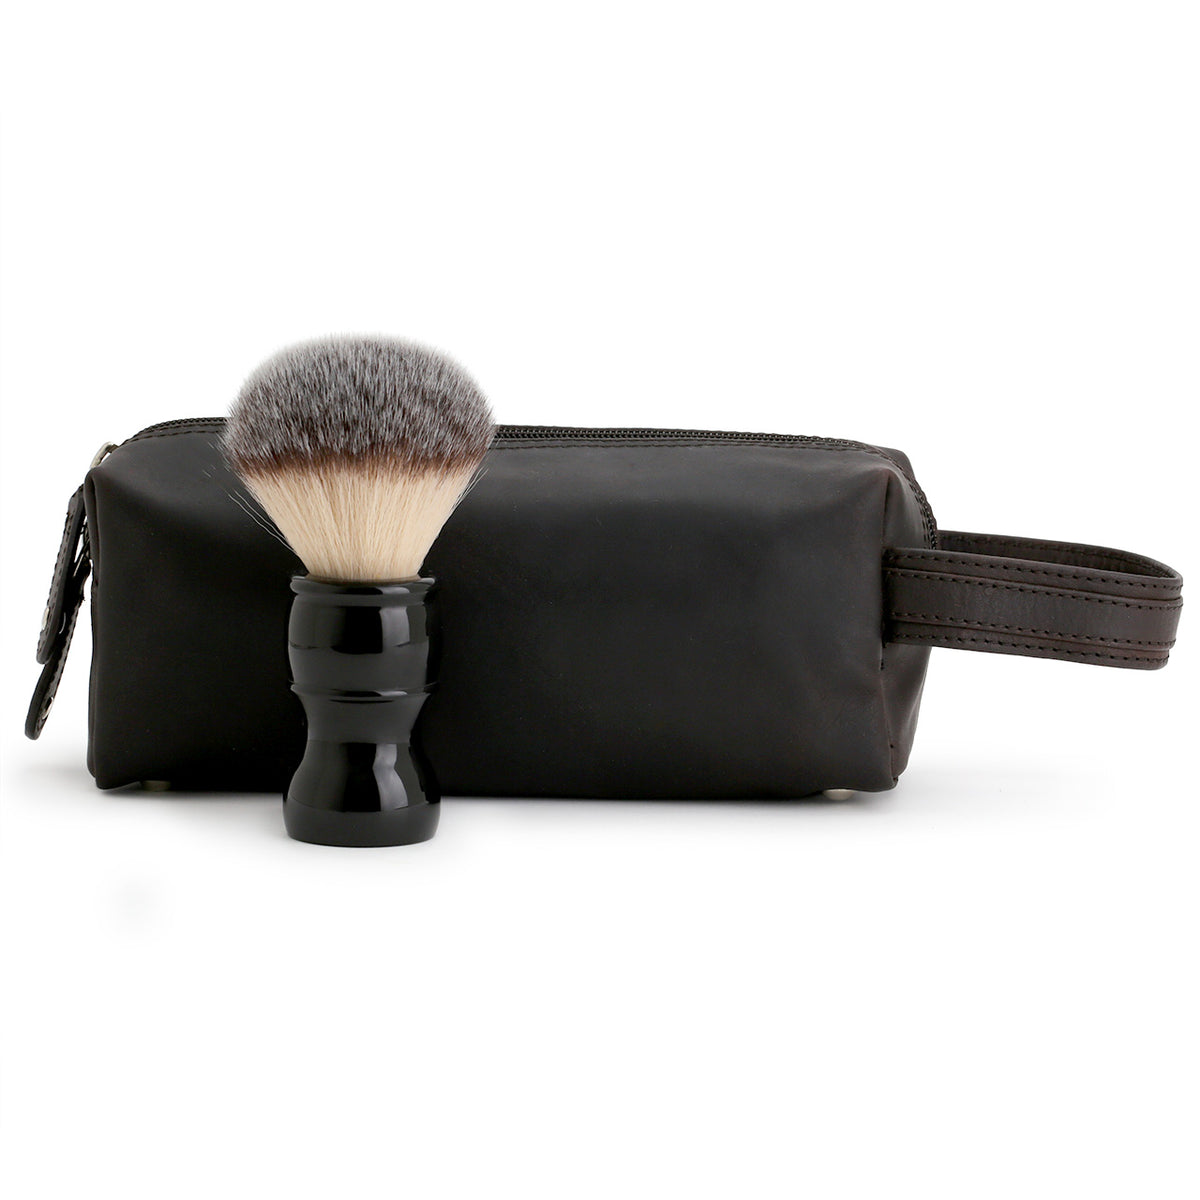 Compact Brown Leather Dopp bag, side view with shaving brush for size comparison